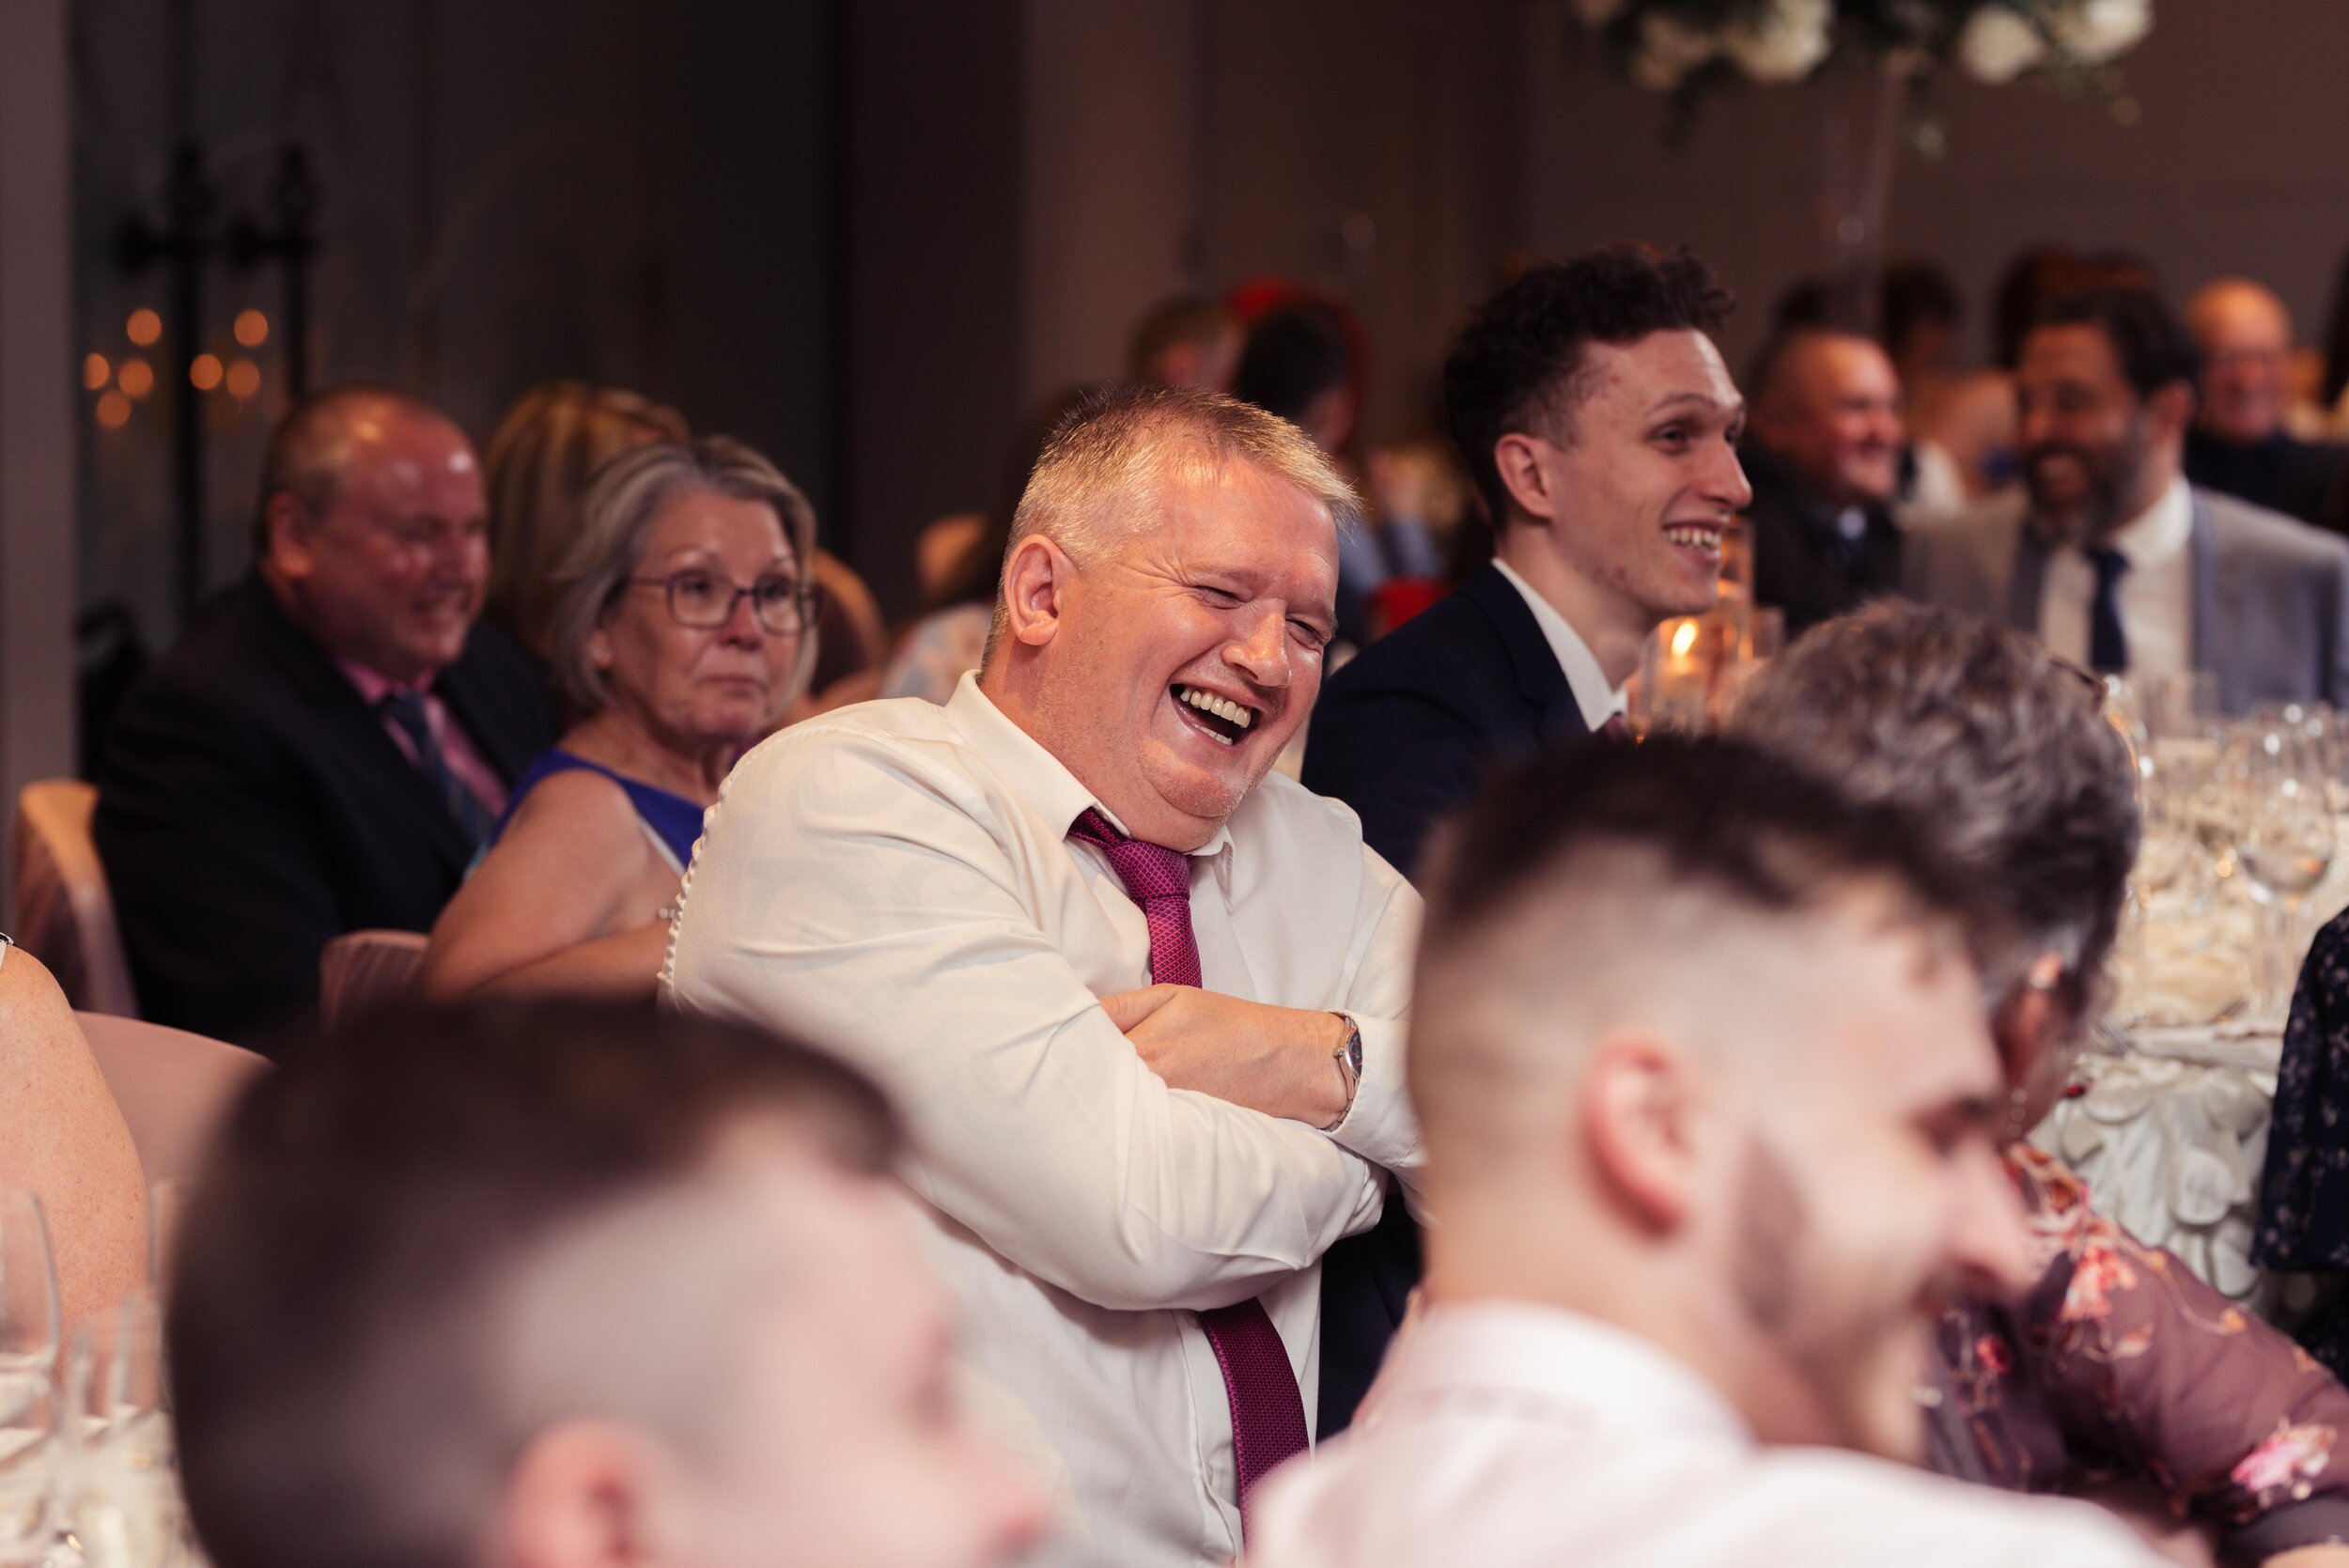 Male wedding guest laughing during the speeches